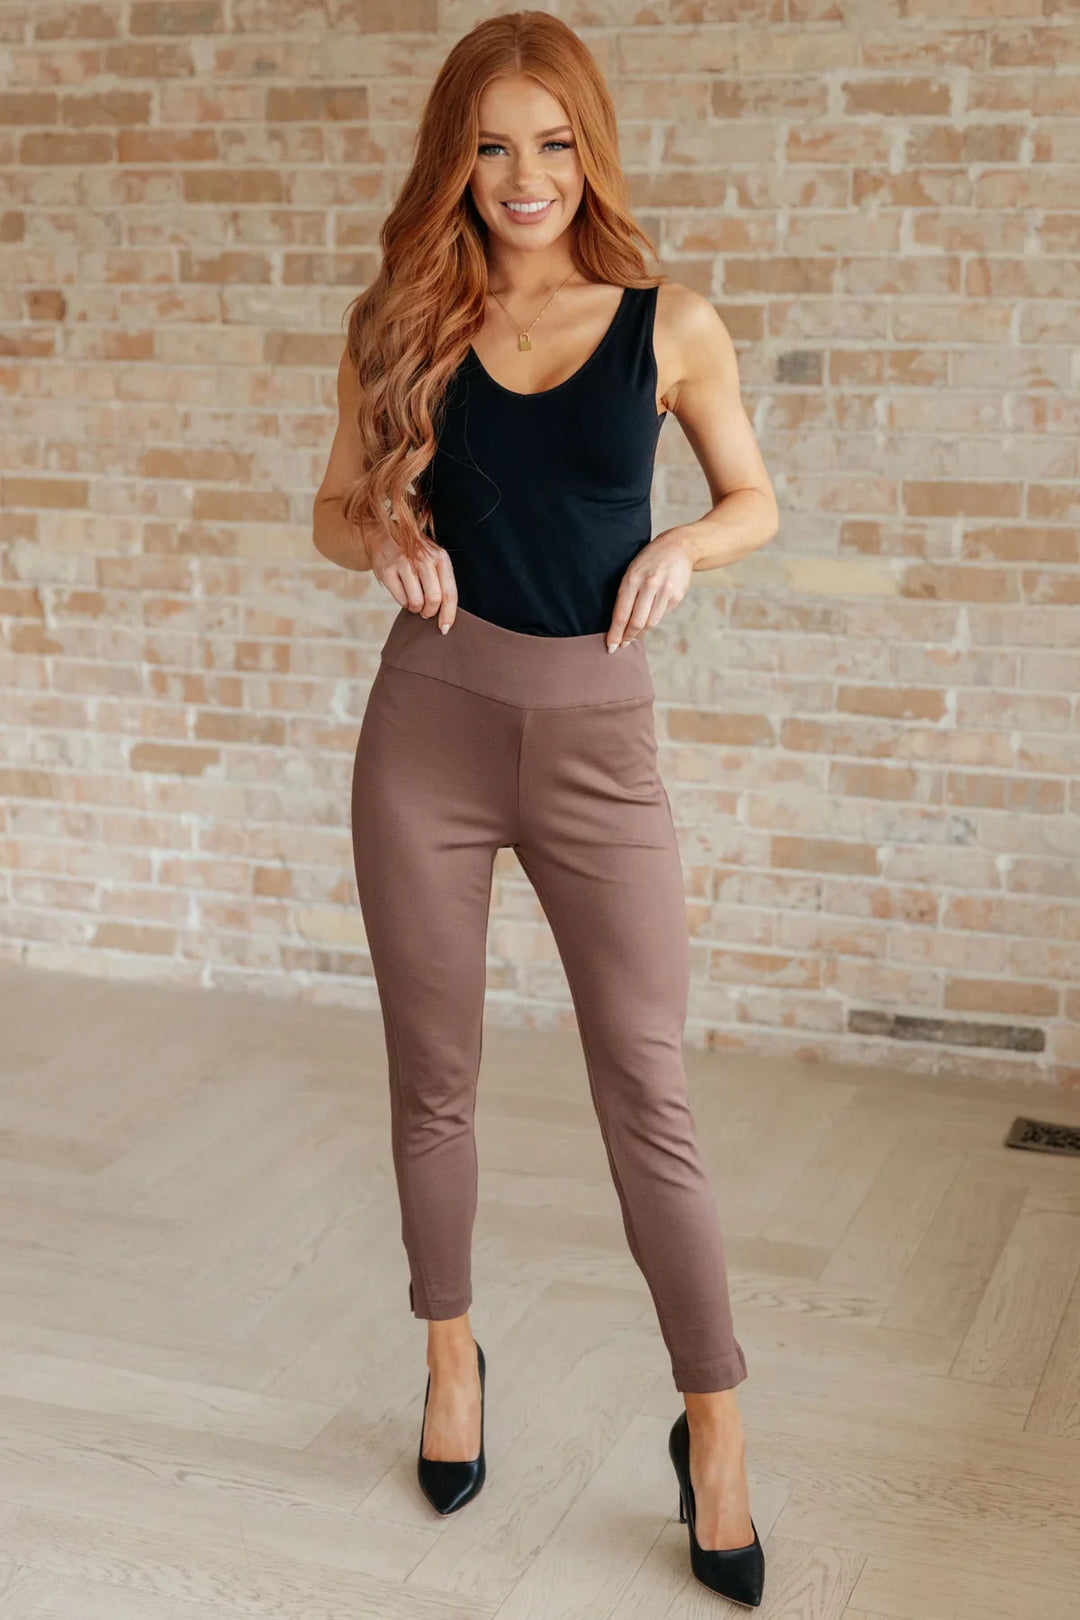 Magic Skinny Pants - Ankle Crop 26" (12 Colors) - Joy & Country